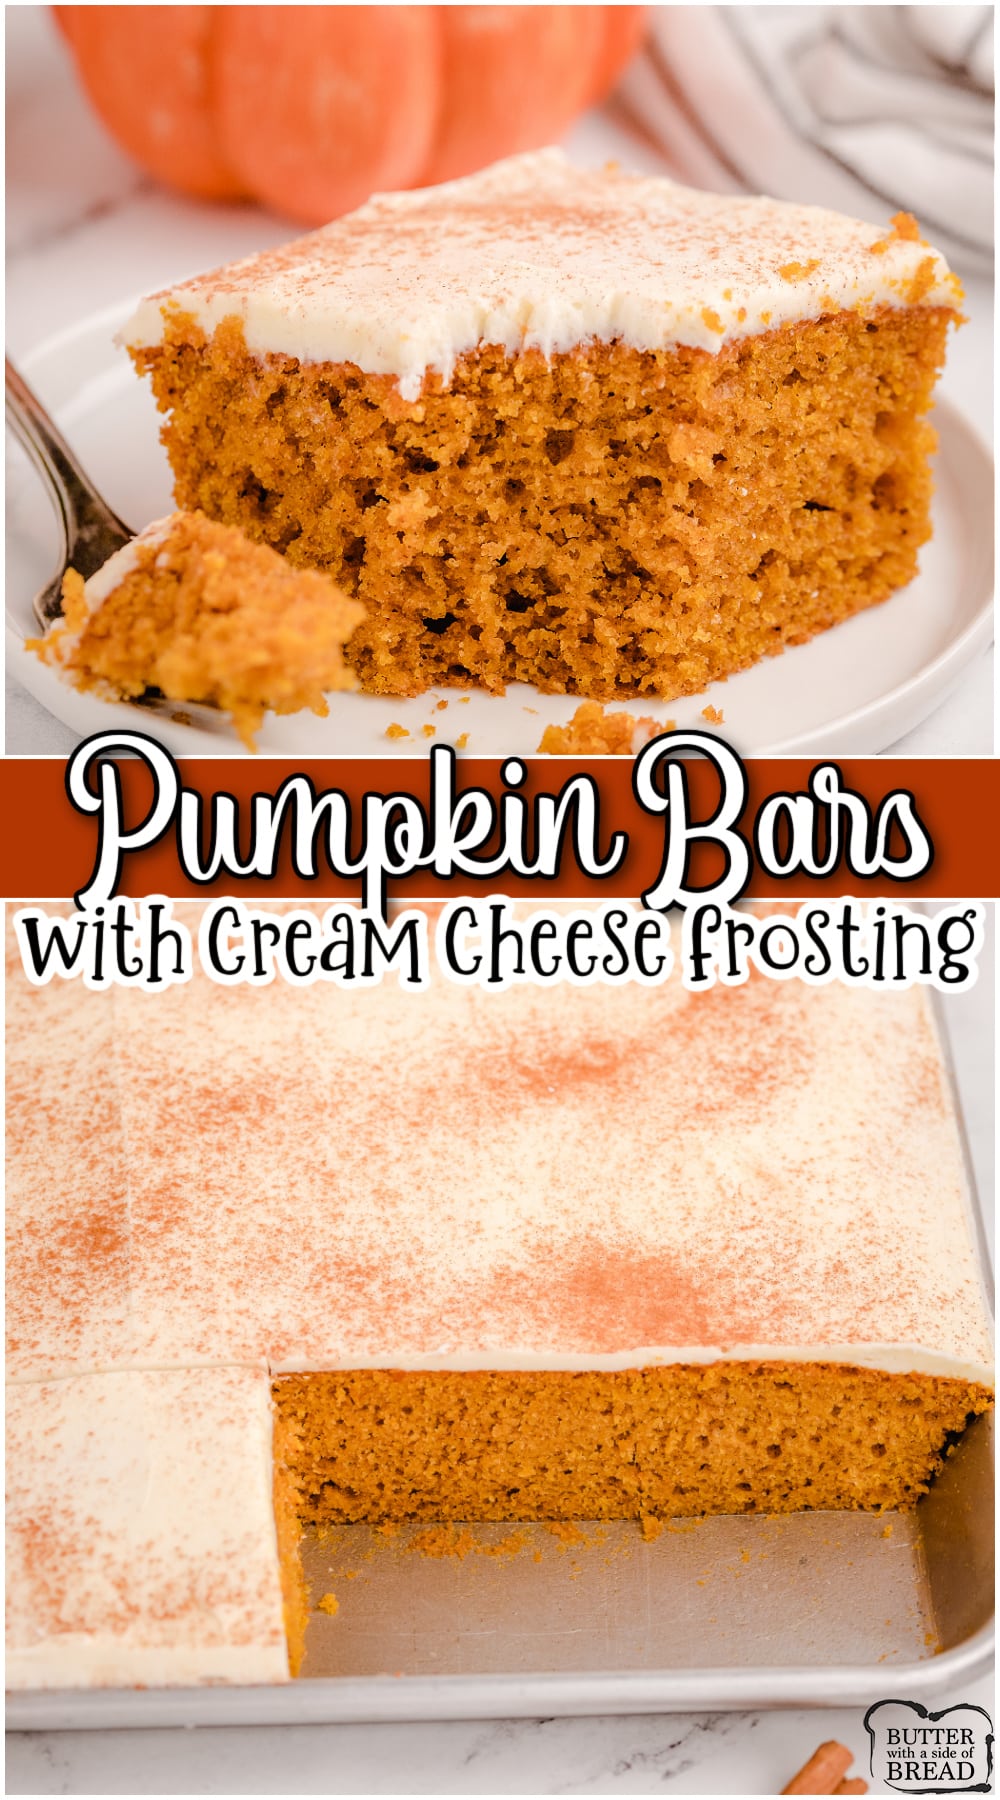 Pumpkin Spice Bars made from scratch & topped with a lovely cream cheese frosting! Simple pumpkin bars made with pumpkin puree & spiced with cinnamon, ginger & cloves.